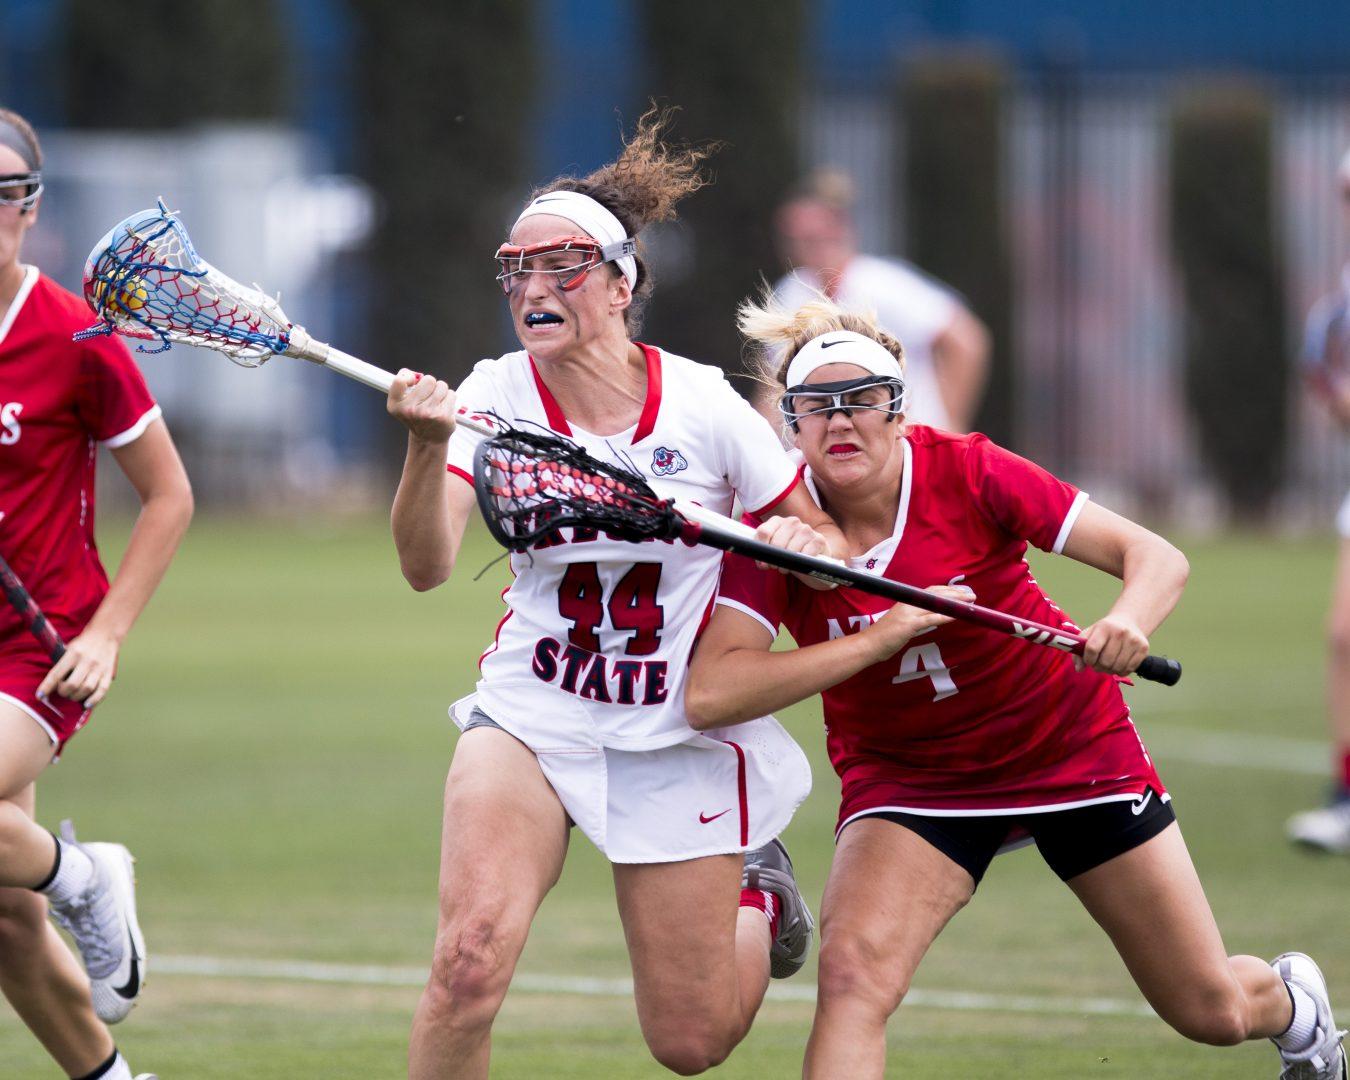 Senior Abigail Bergevin battles against San Diego State on April 15, 2018 at the Soccer and Lacrosse Field. The ‘Dogs lost 15-11. (Ramuel Reyes/ The Collegian) 